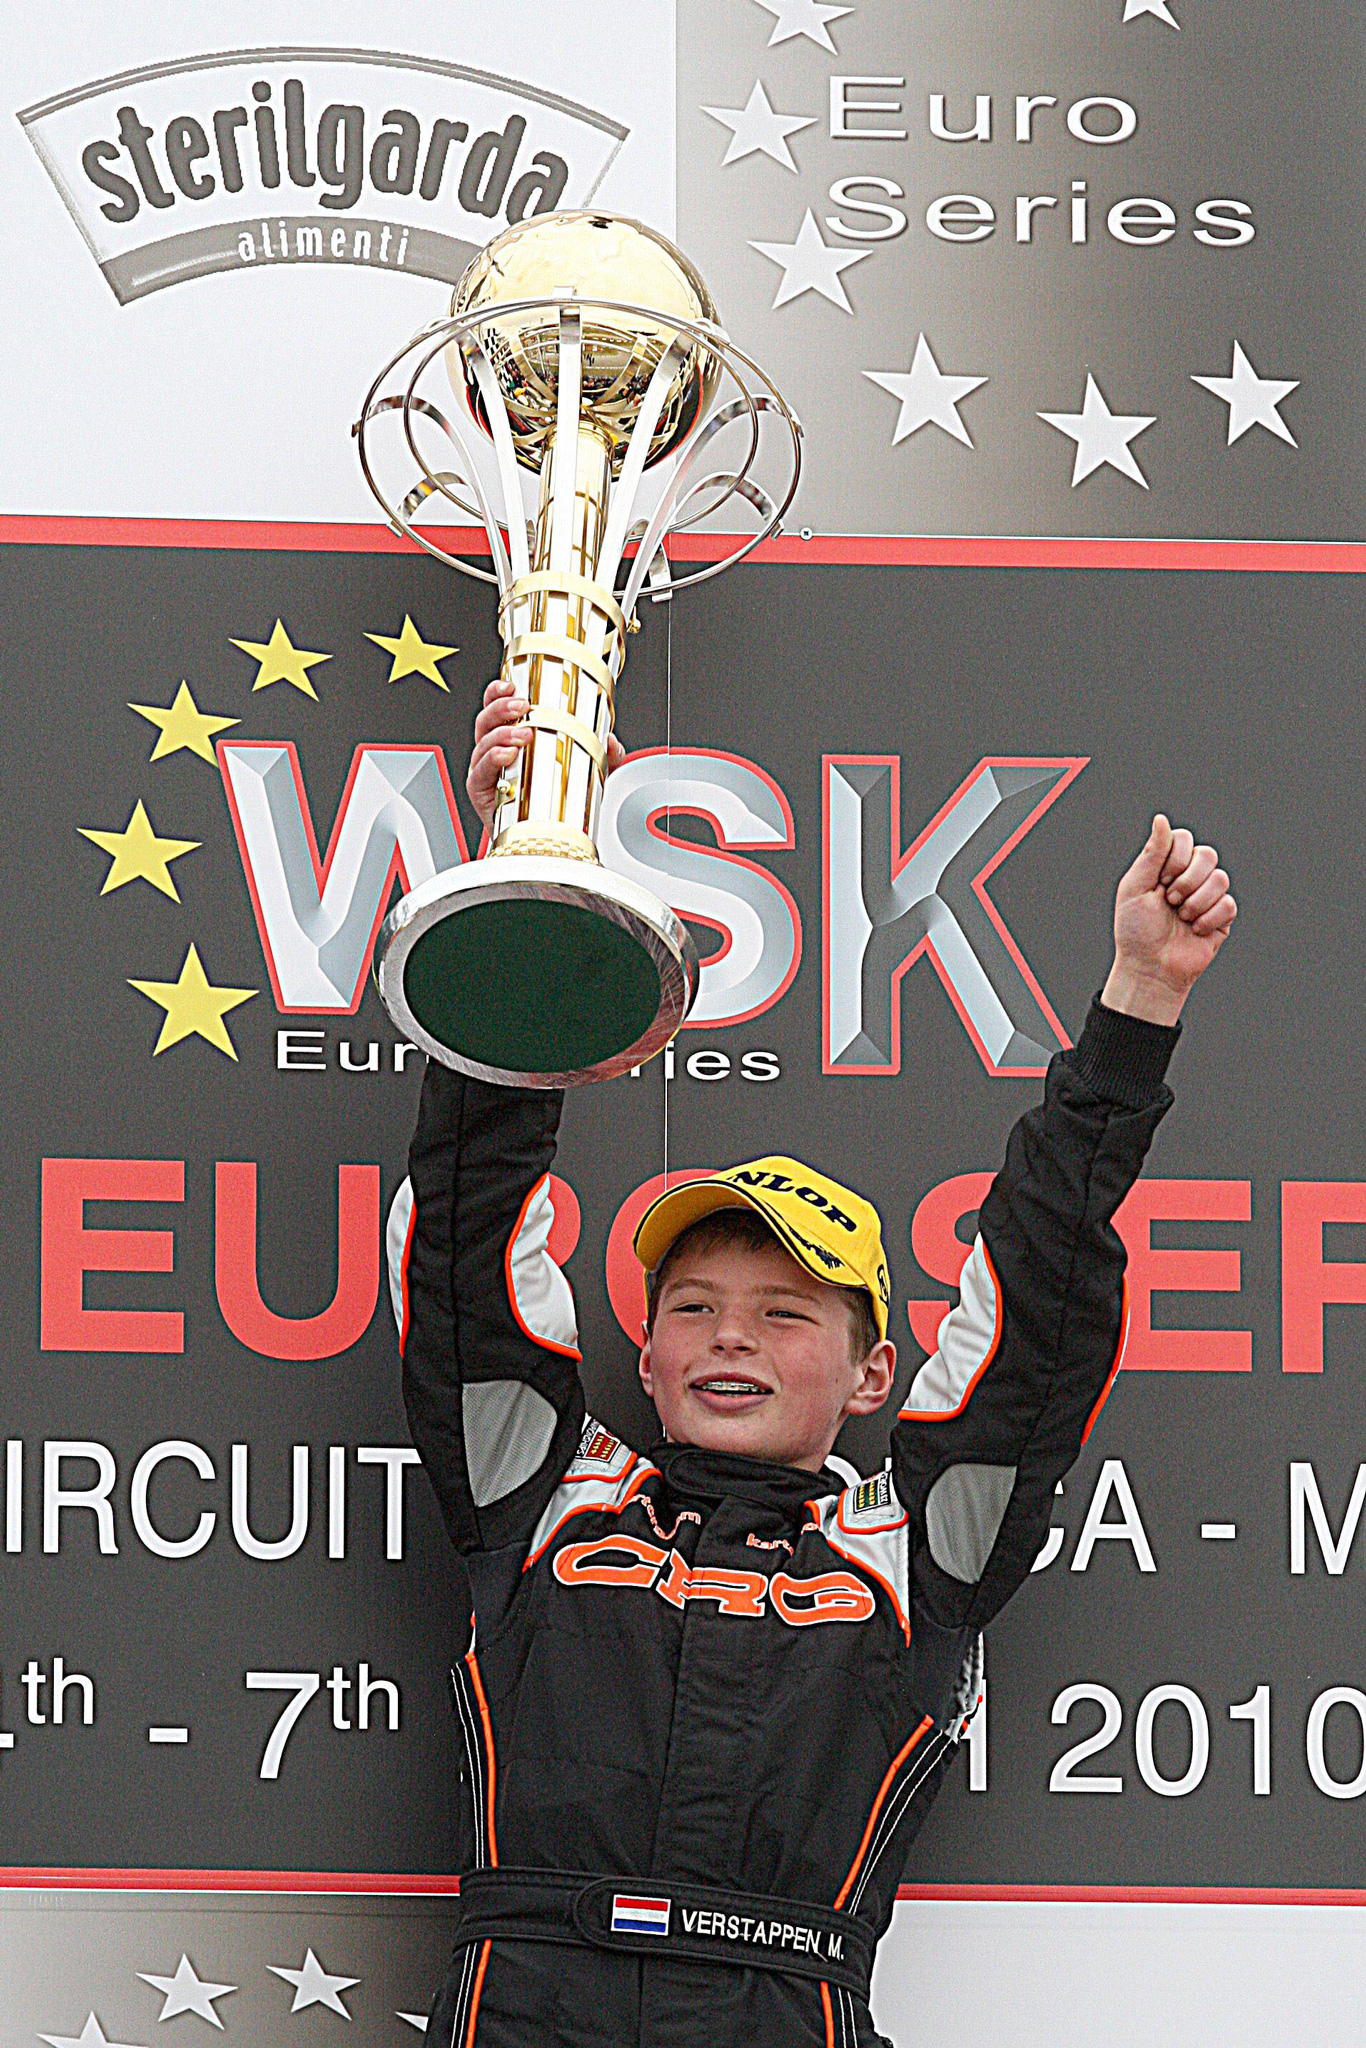 Max Verstappen at the podium during the WSK Junior Karting Euro Series in 2010.